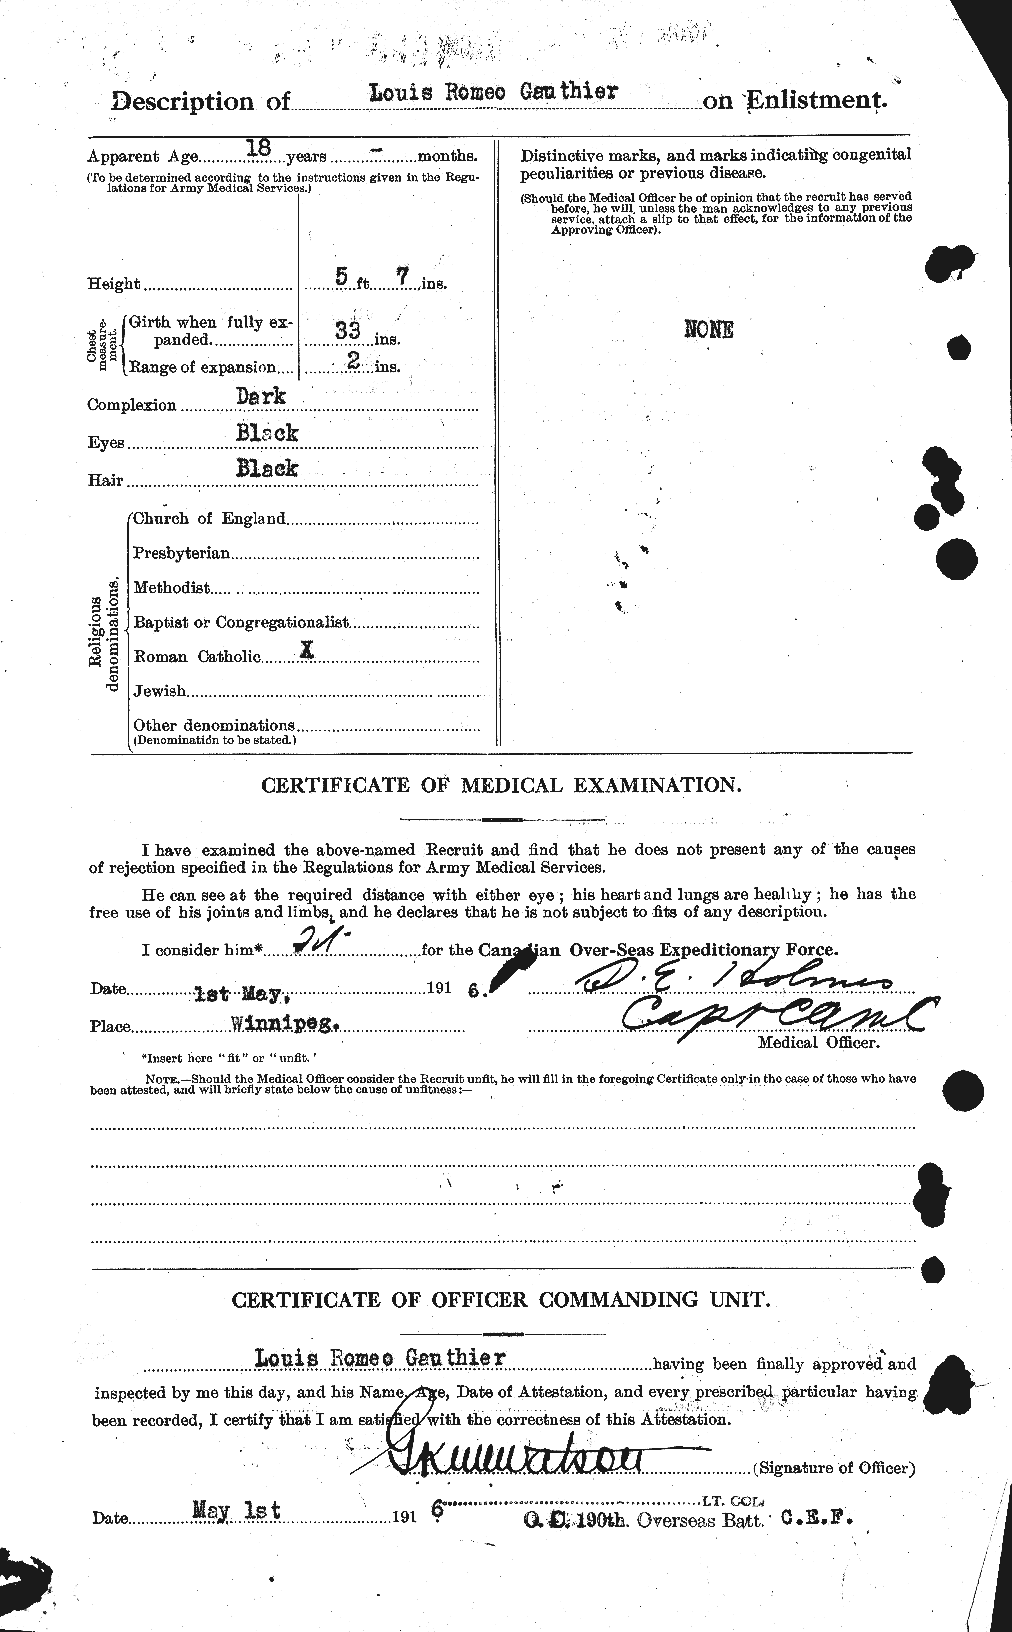 Personnel Records of the First World War - CEF 342939b